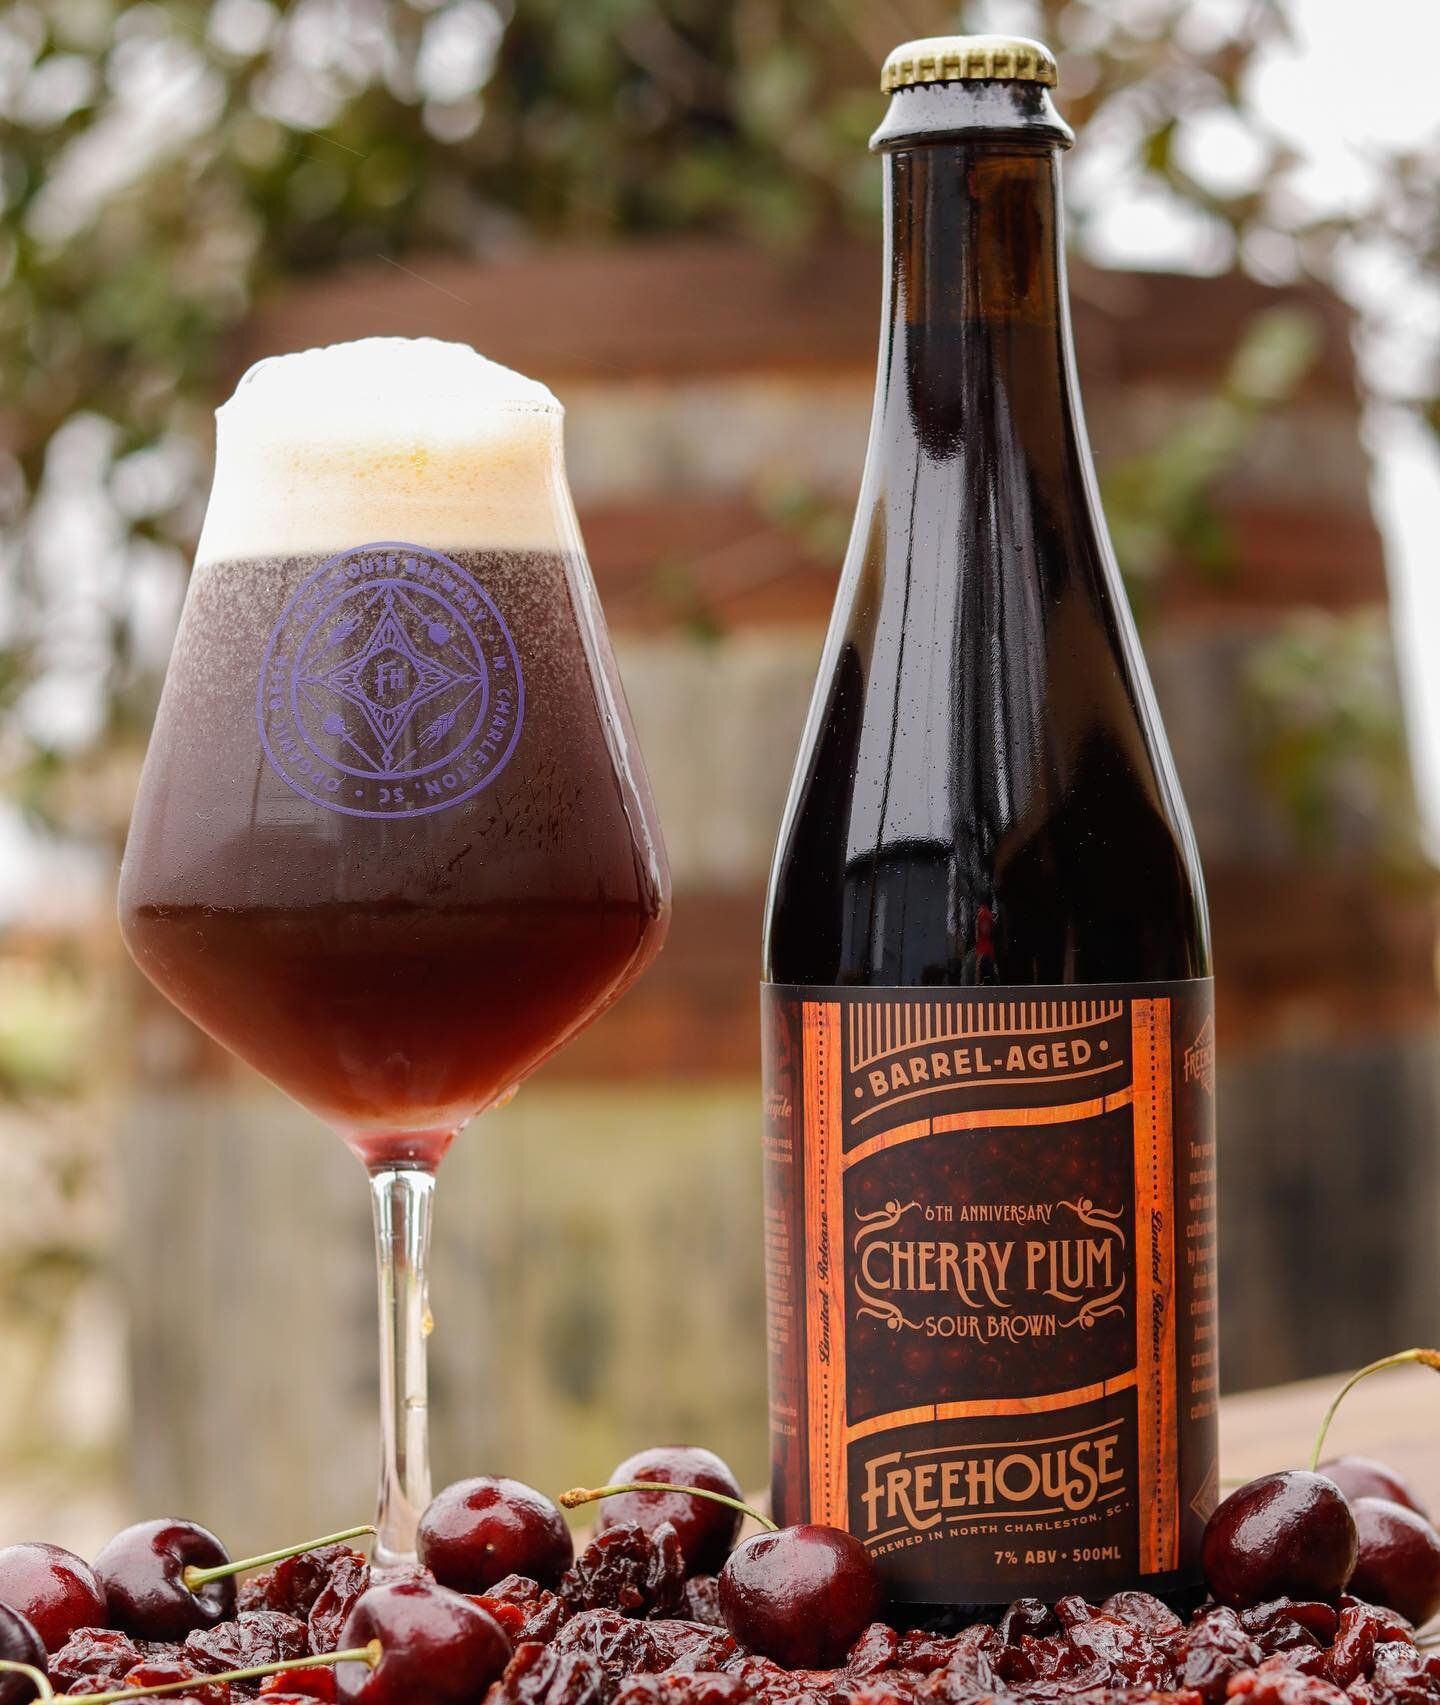 You can now get our 6th Anniversary Cherry Plum Sour Brown in bottles! 🍒 
Dried organic cherries and plums were brewed with our house-mixed wild cultures and then aged for 2 years in oak barrels. 7% ABV - Dark and tart with a mild caramel flavor.

#